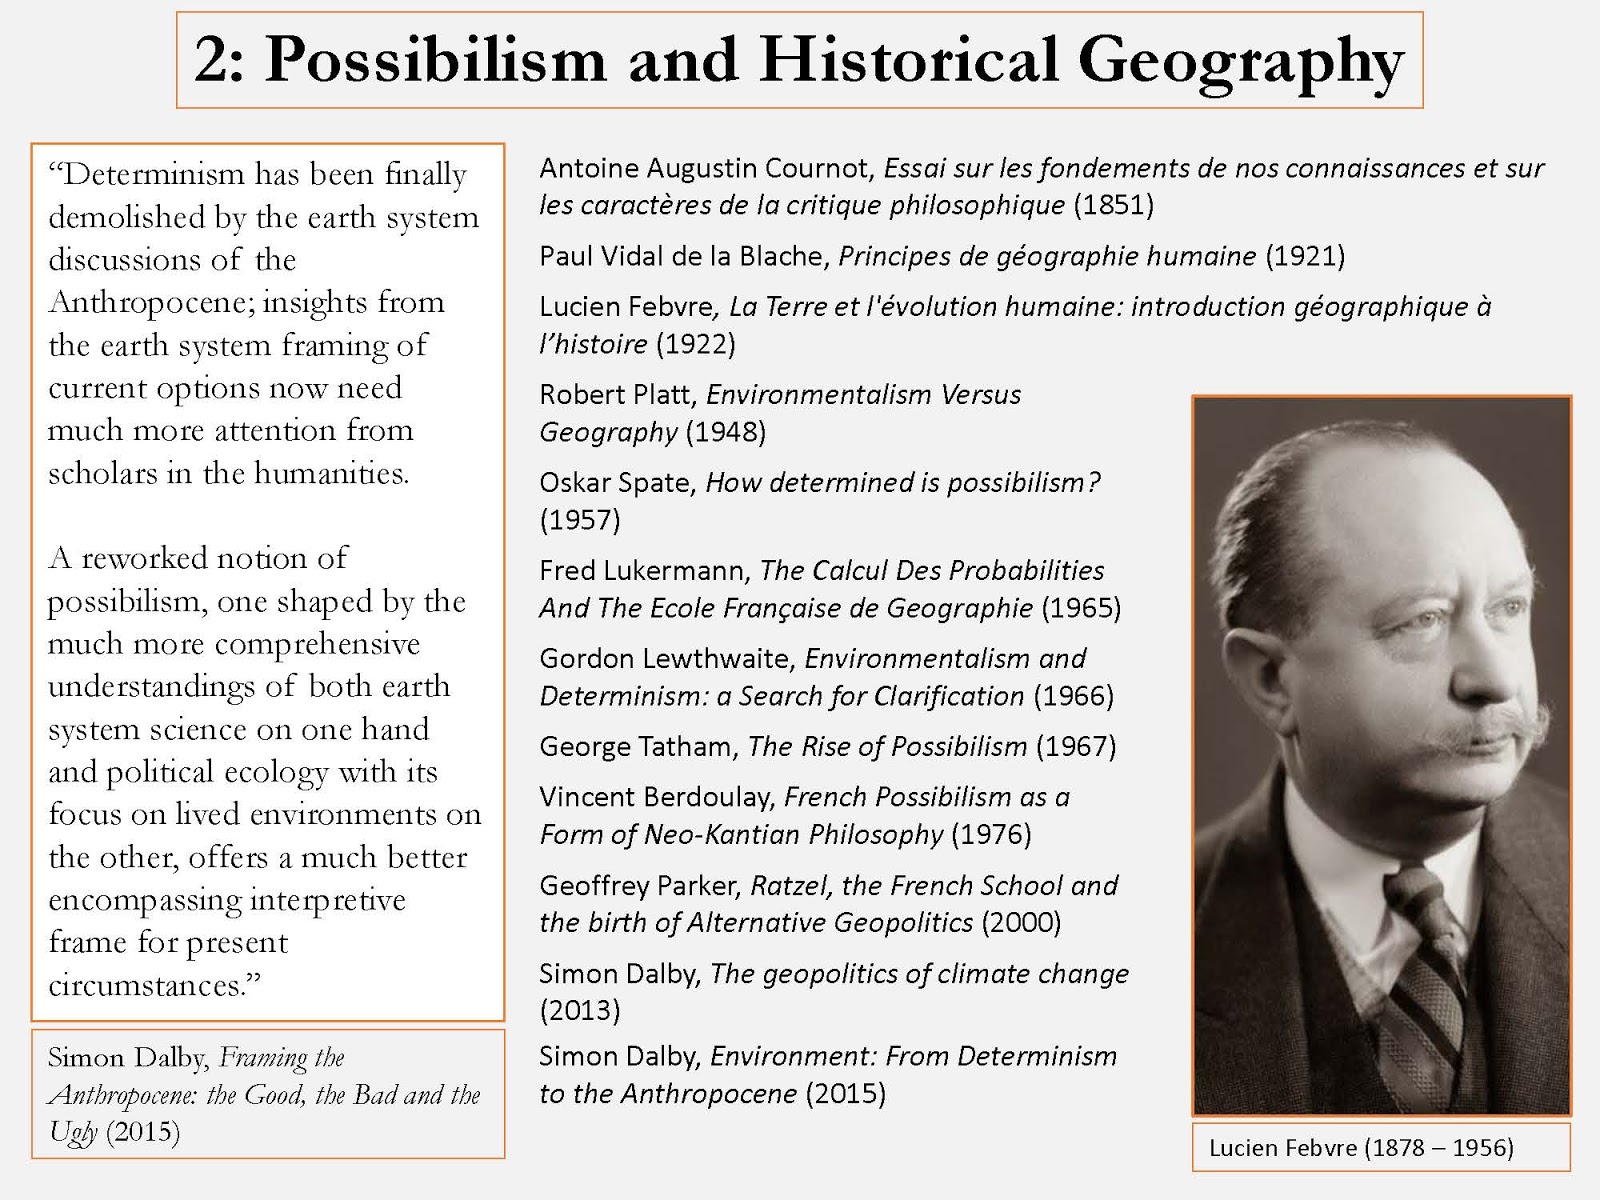 Possibilism in geography